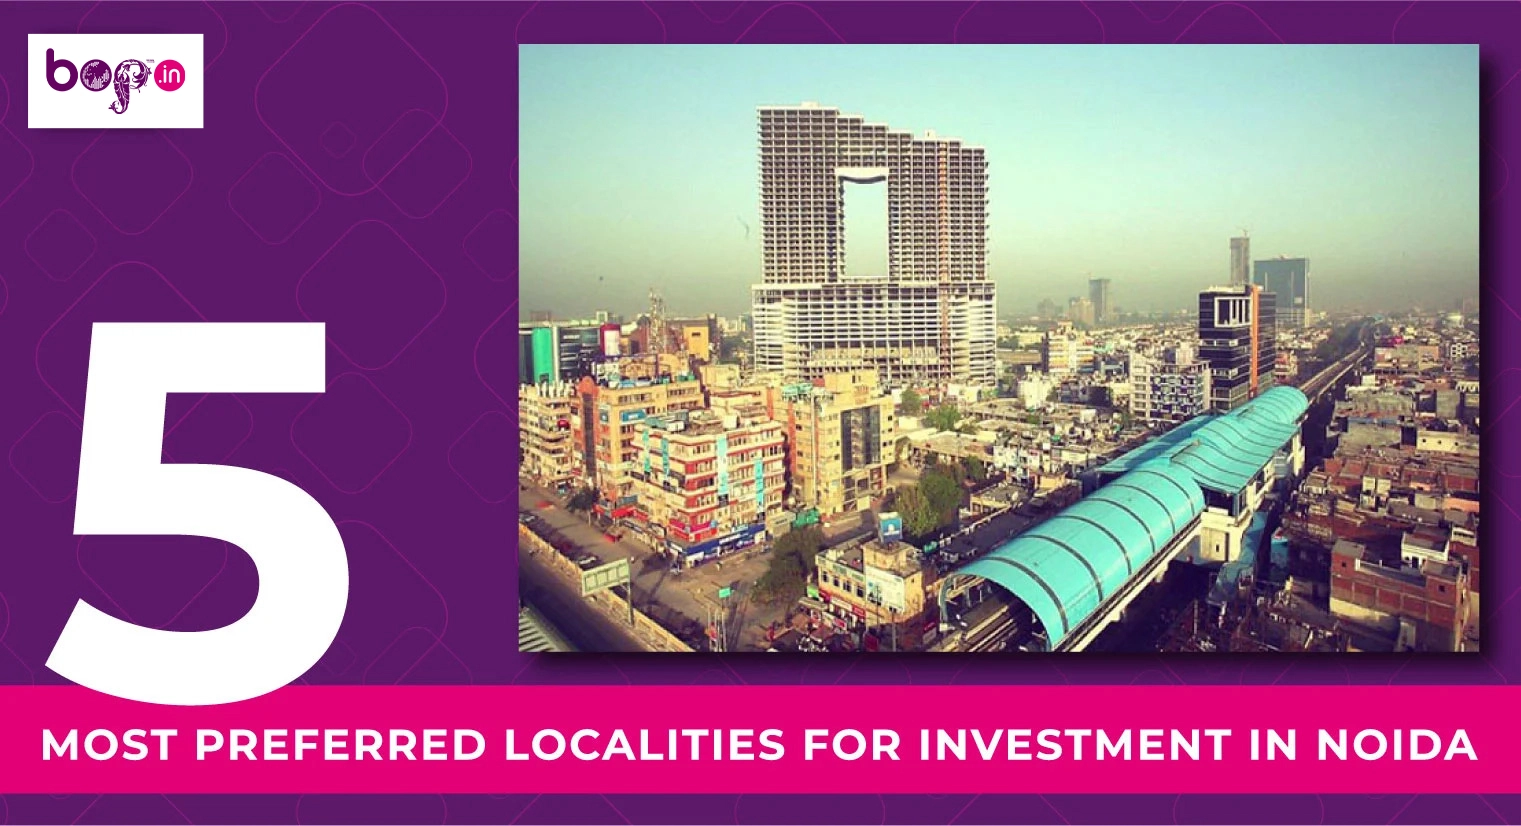 5 Most Preferred Localities for Investment in Noida